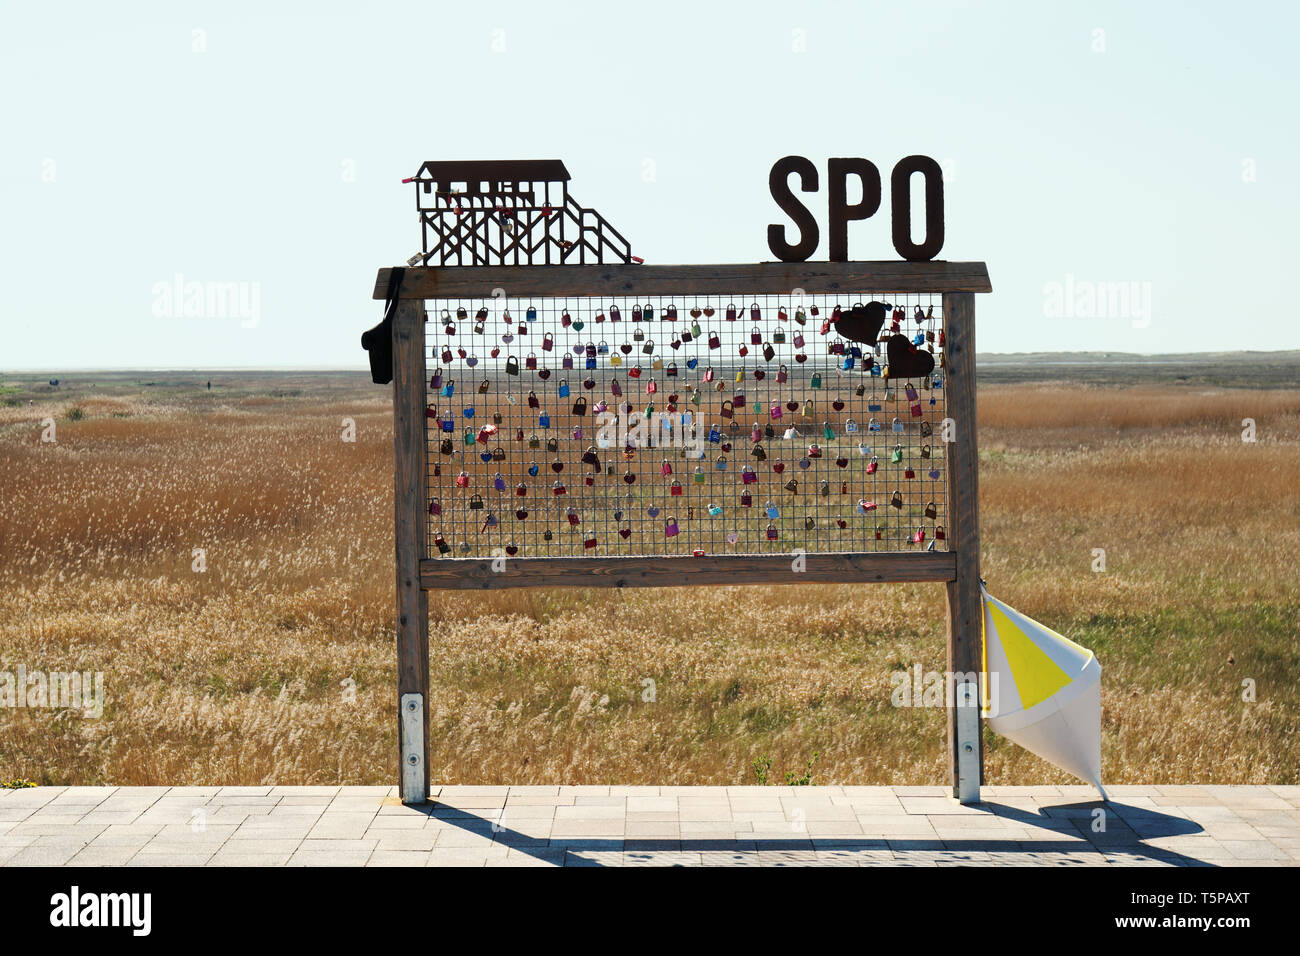 Sankt Peter Ording, Germany - April 20, 2019: Love locks at the beach. SPO is short for St. Peter-Ording. Stock Photo